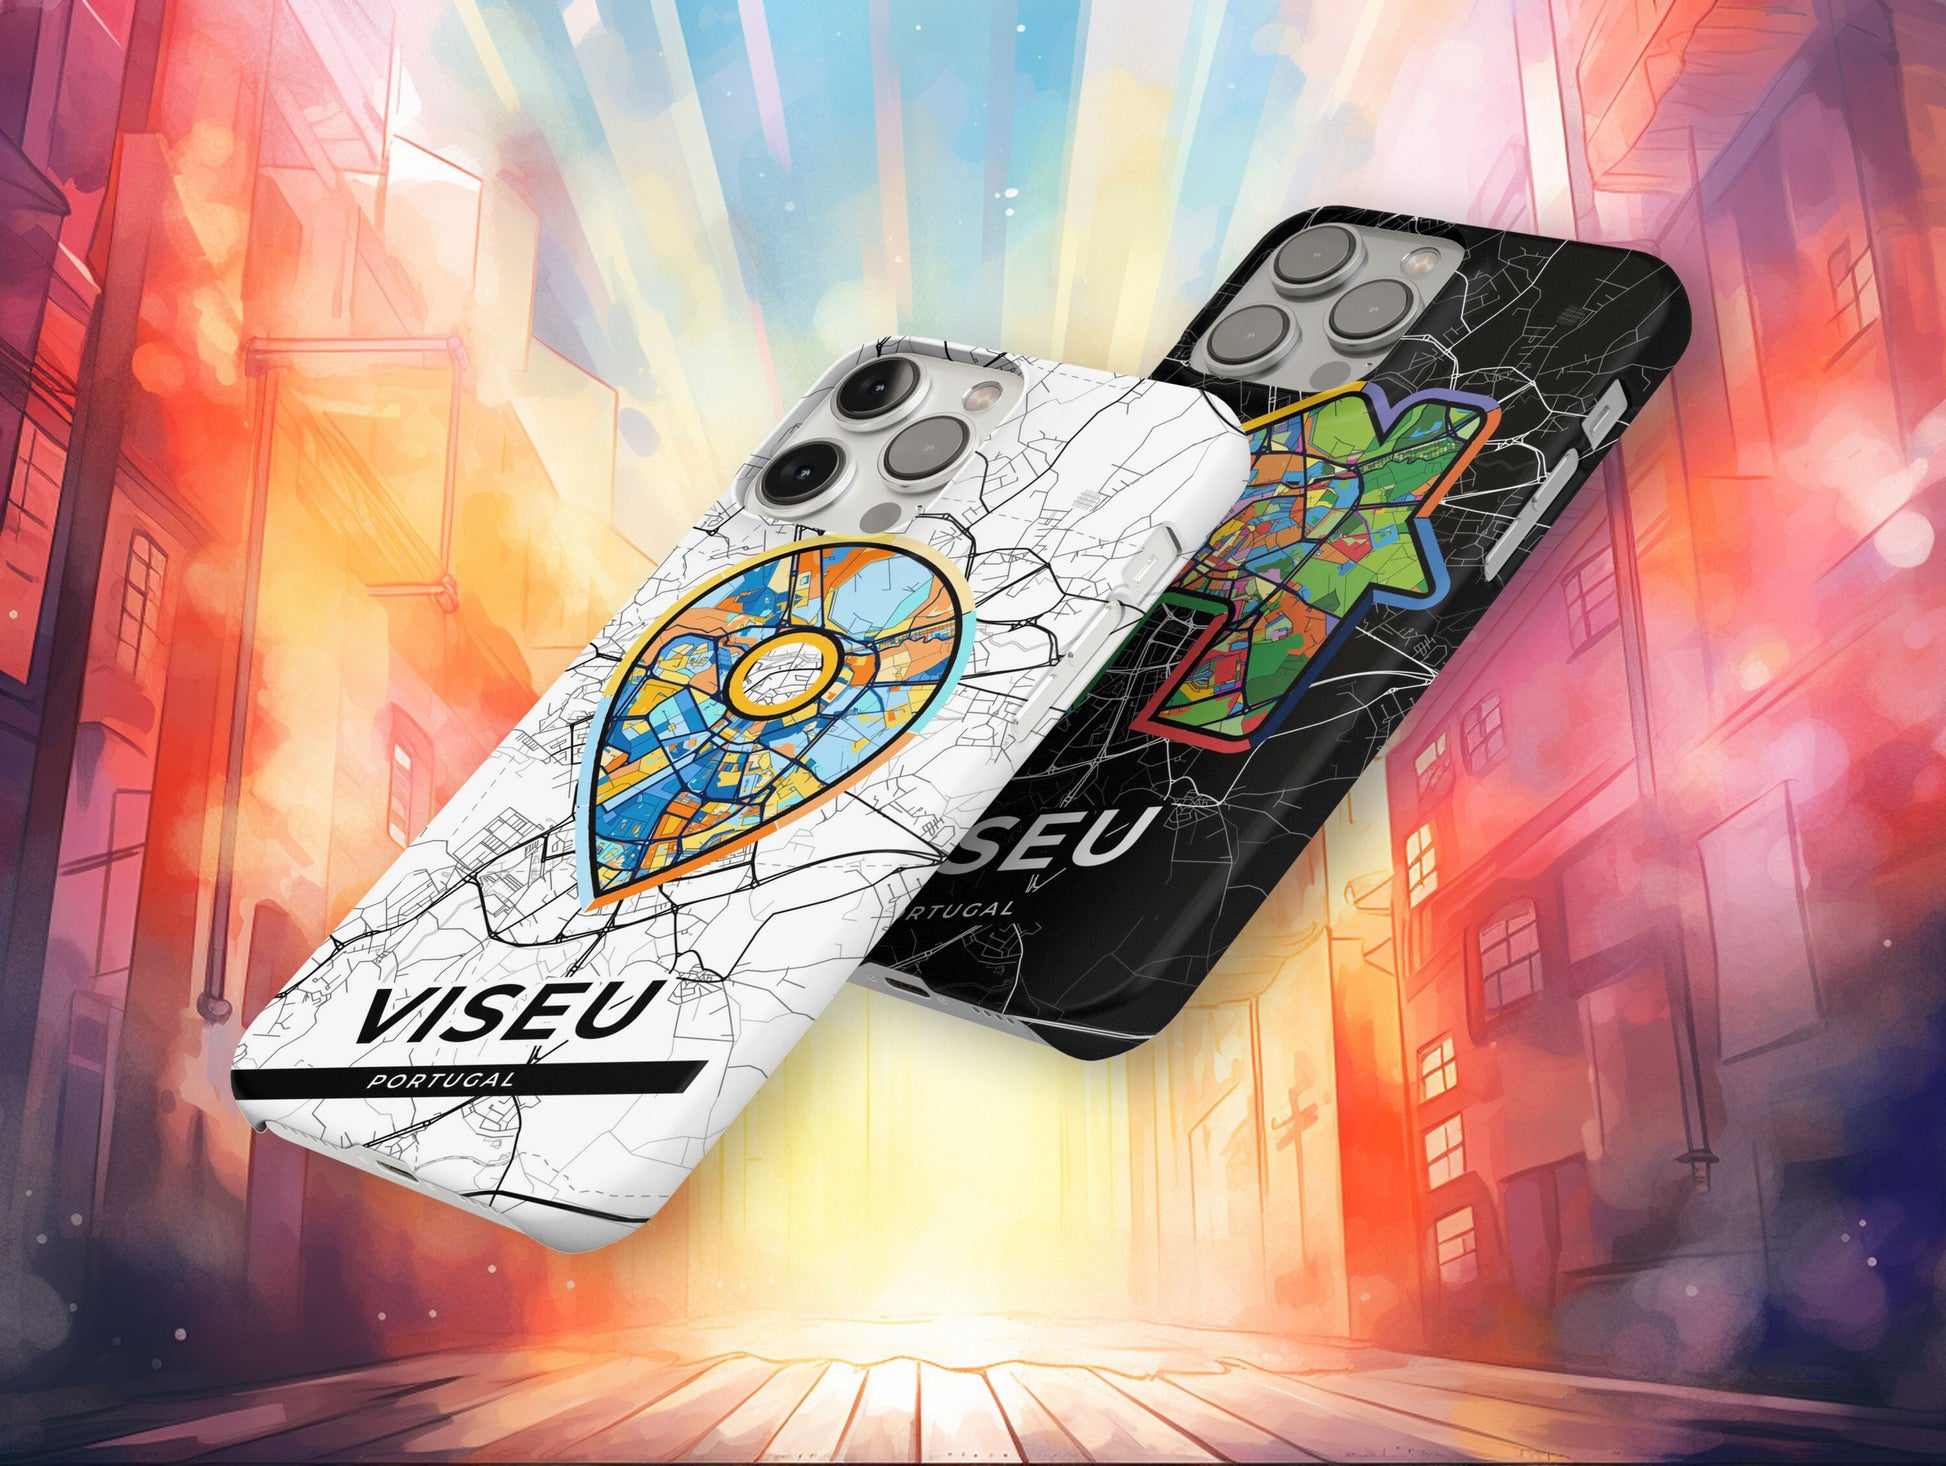 Viseu Portugal slim phone case with colorful icon